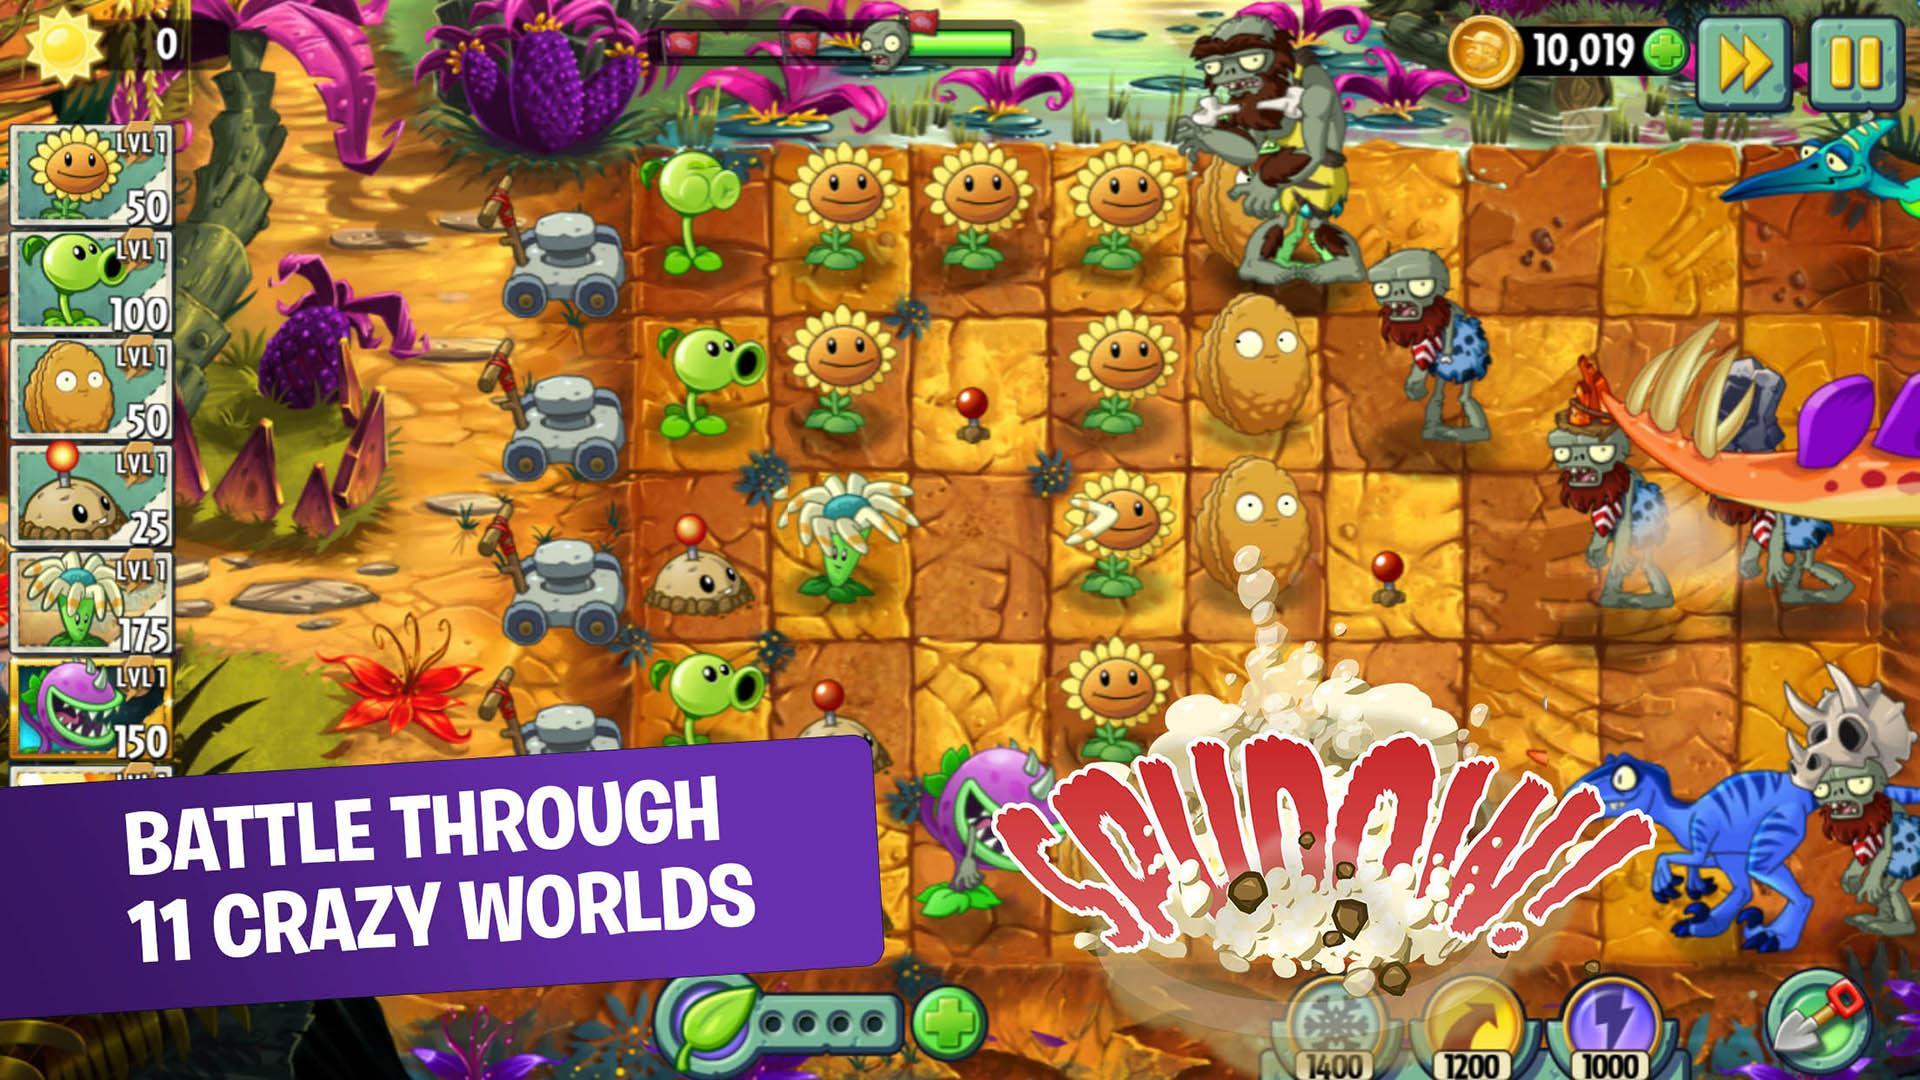 Plants Vs Zombies 2 Apk Download Free Tower Defense Game For Android Apkpure Com